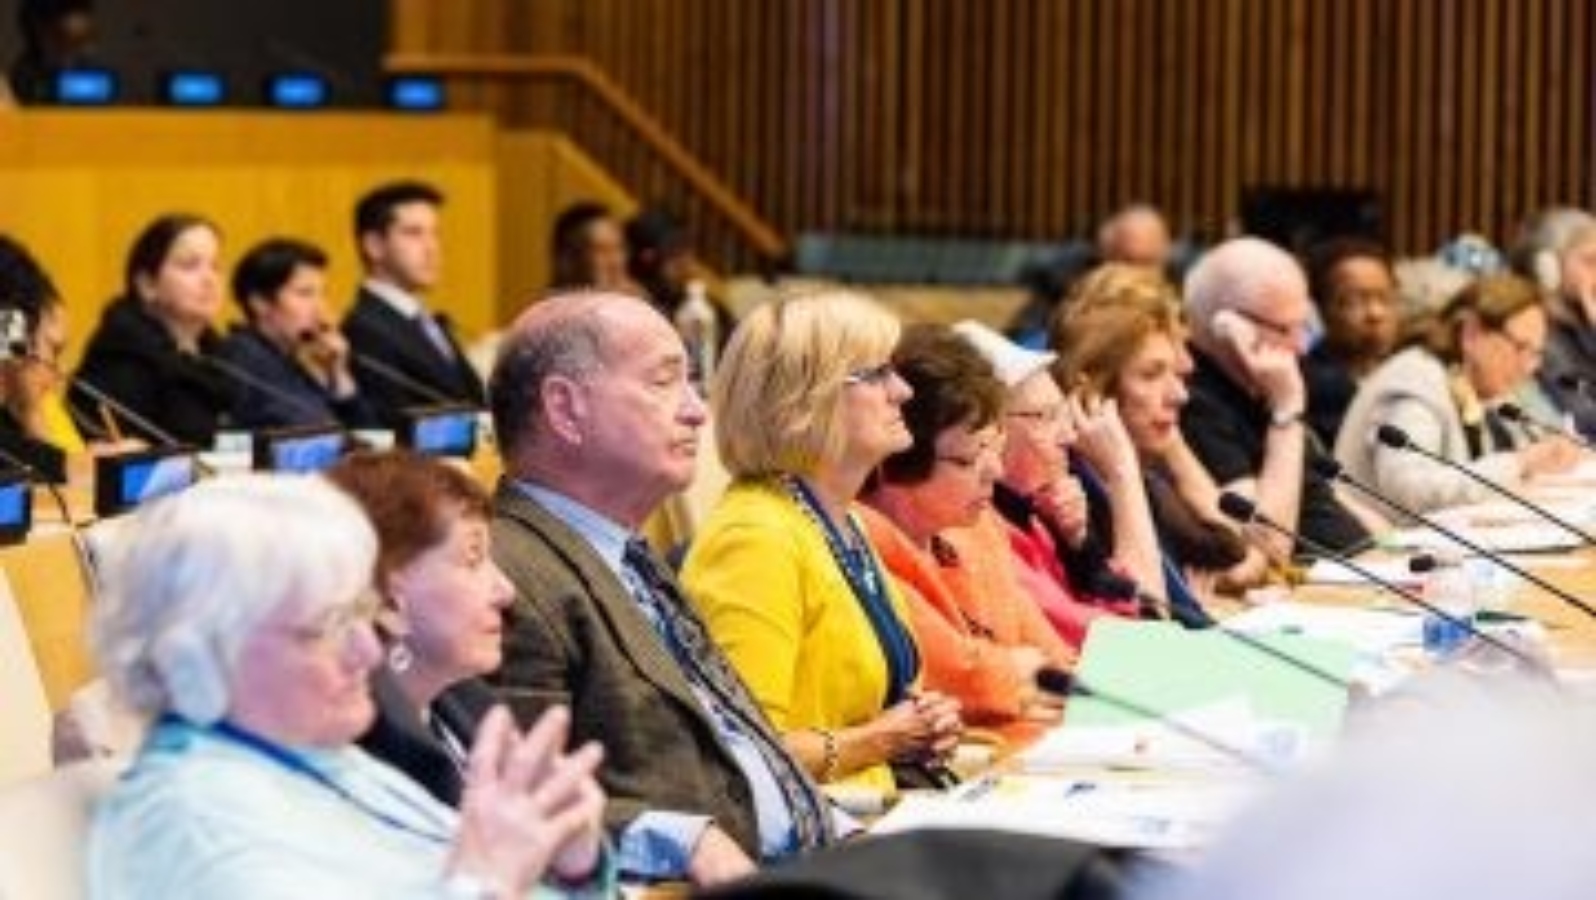 2019 UNIDOP Celebrates "The Journey to Age Equality"